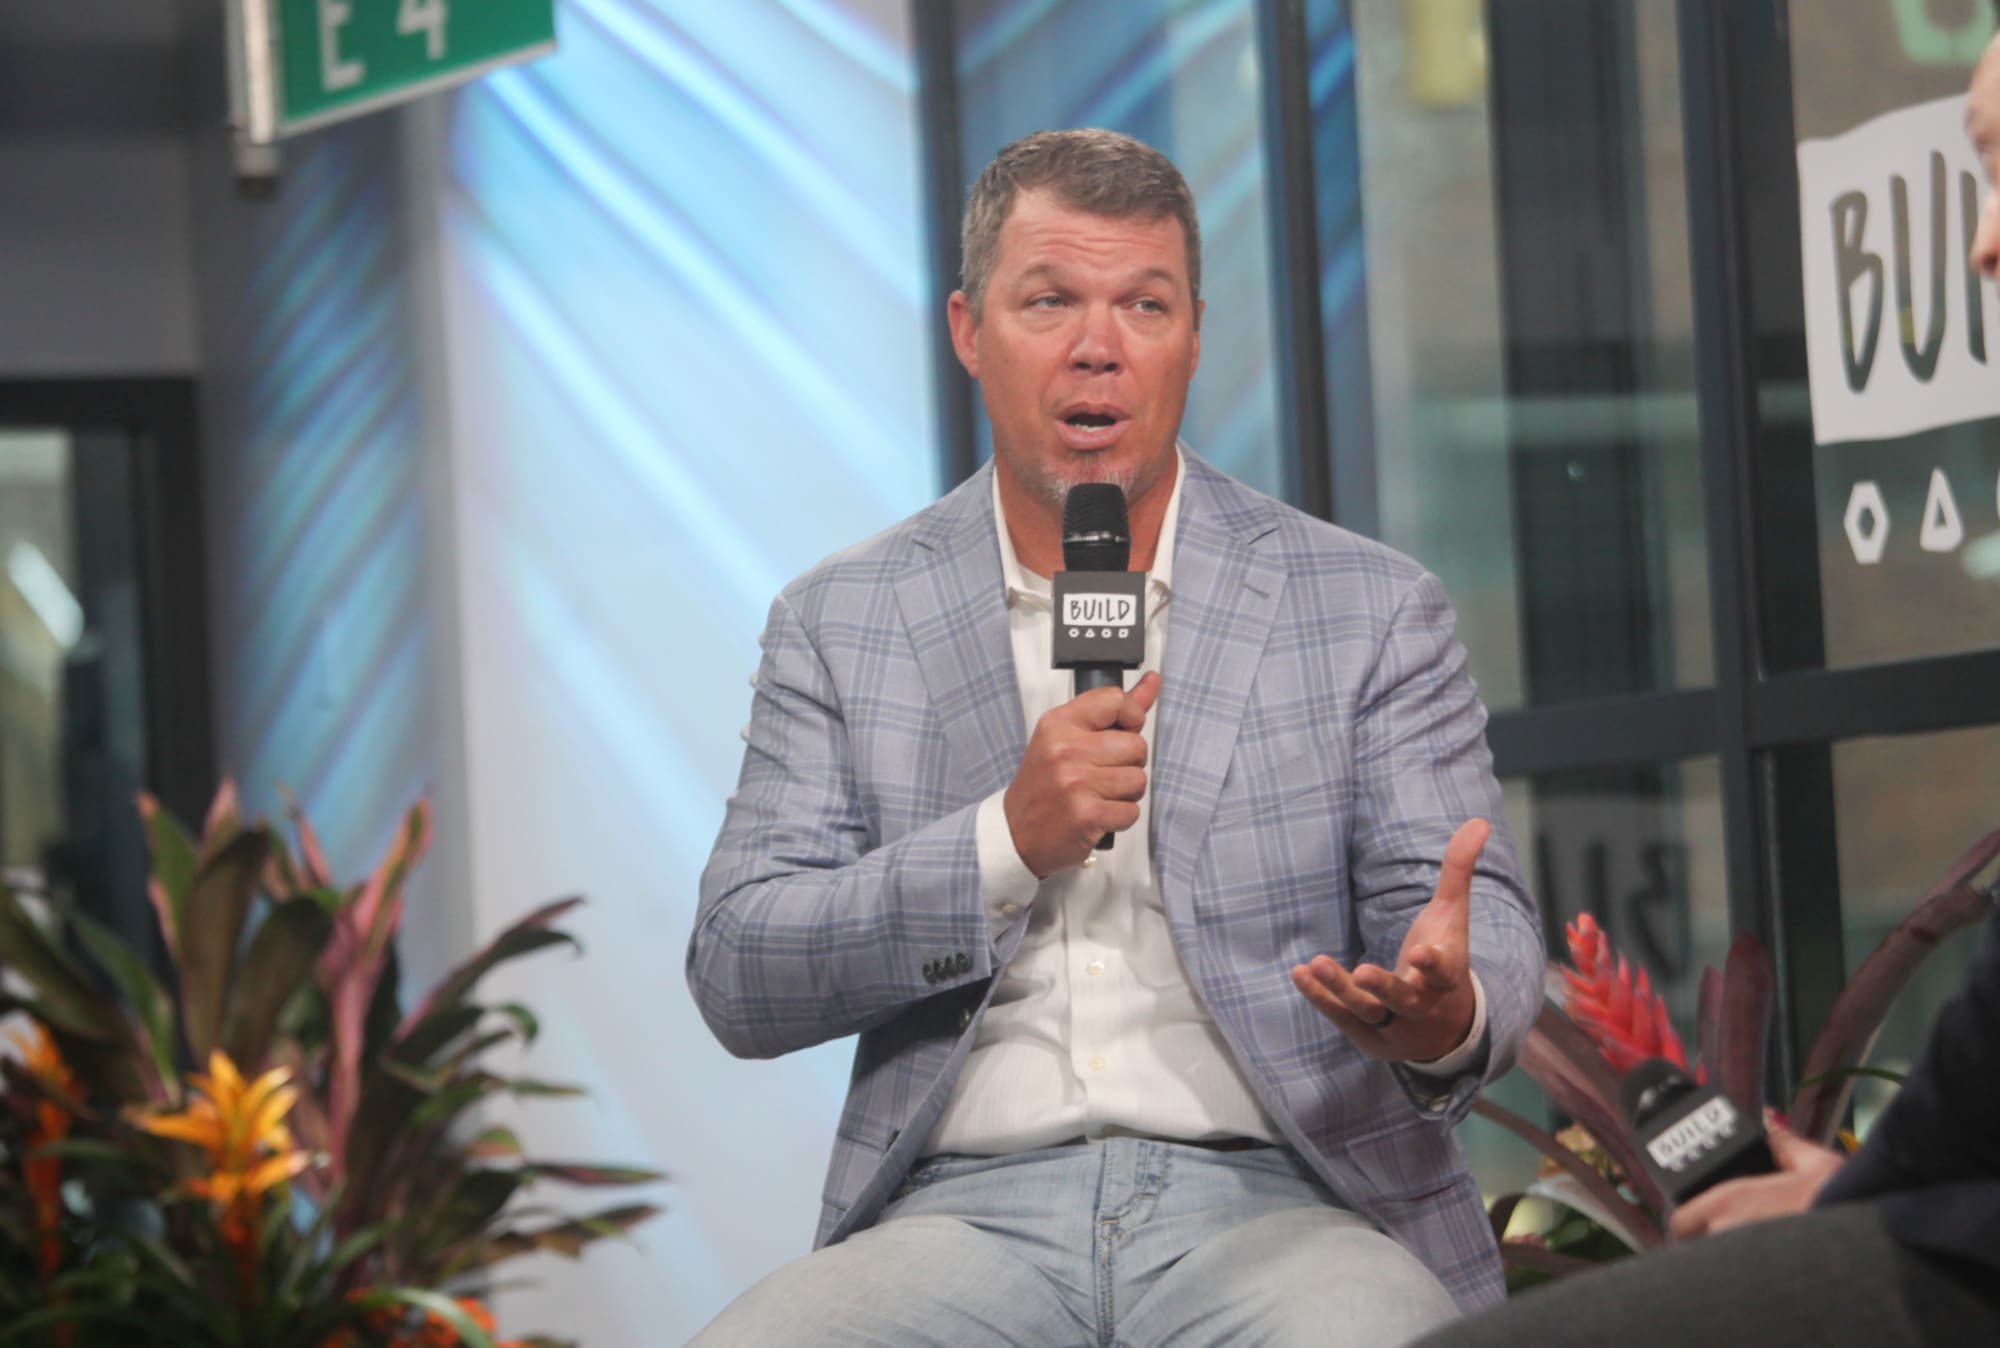 Braves fans will be sick listening to Chipper Jones’ thoughts on the Mets